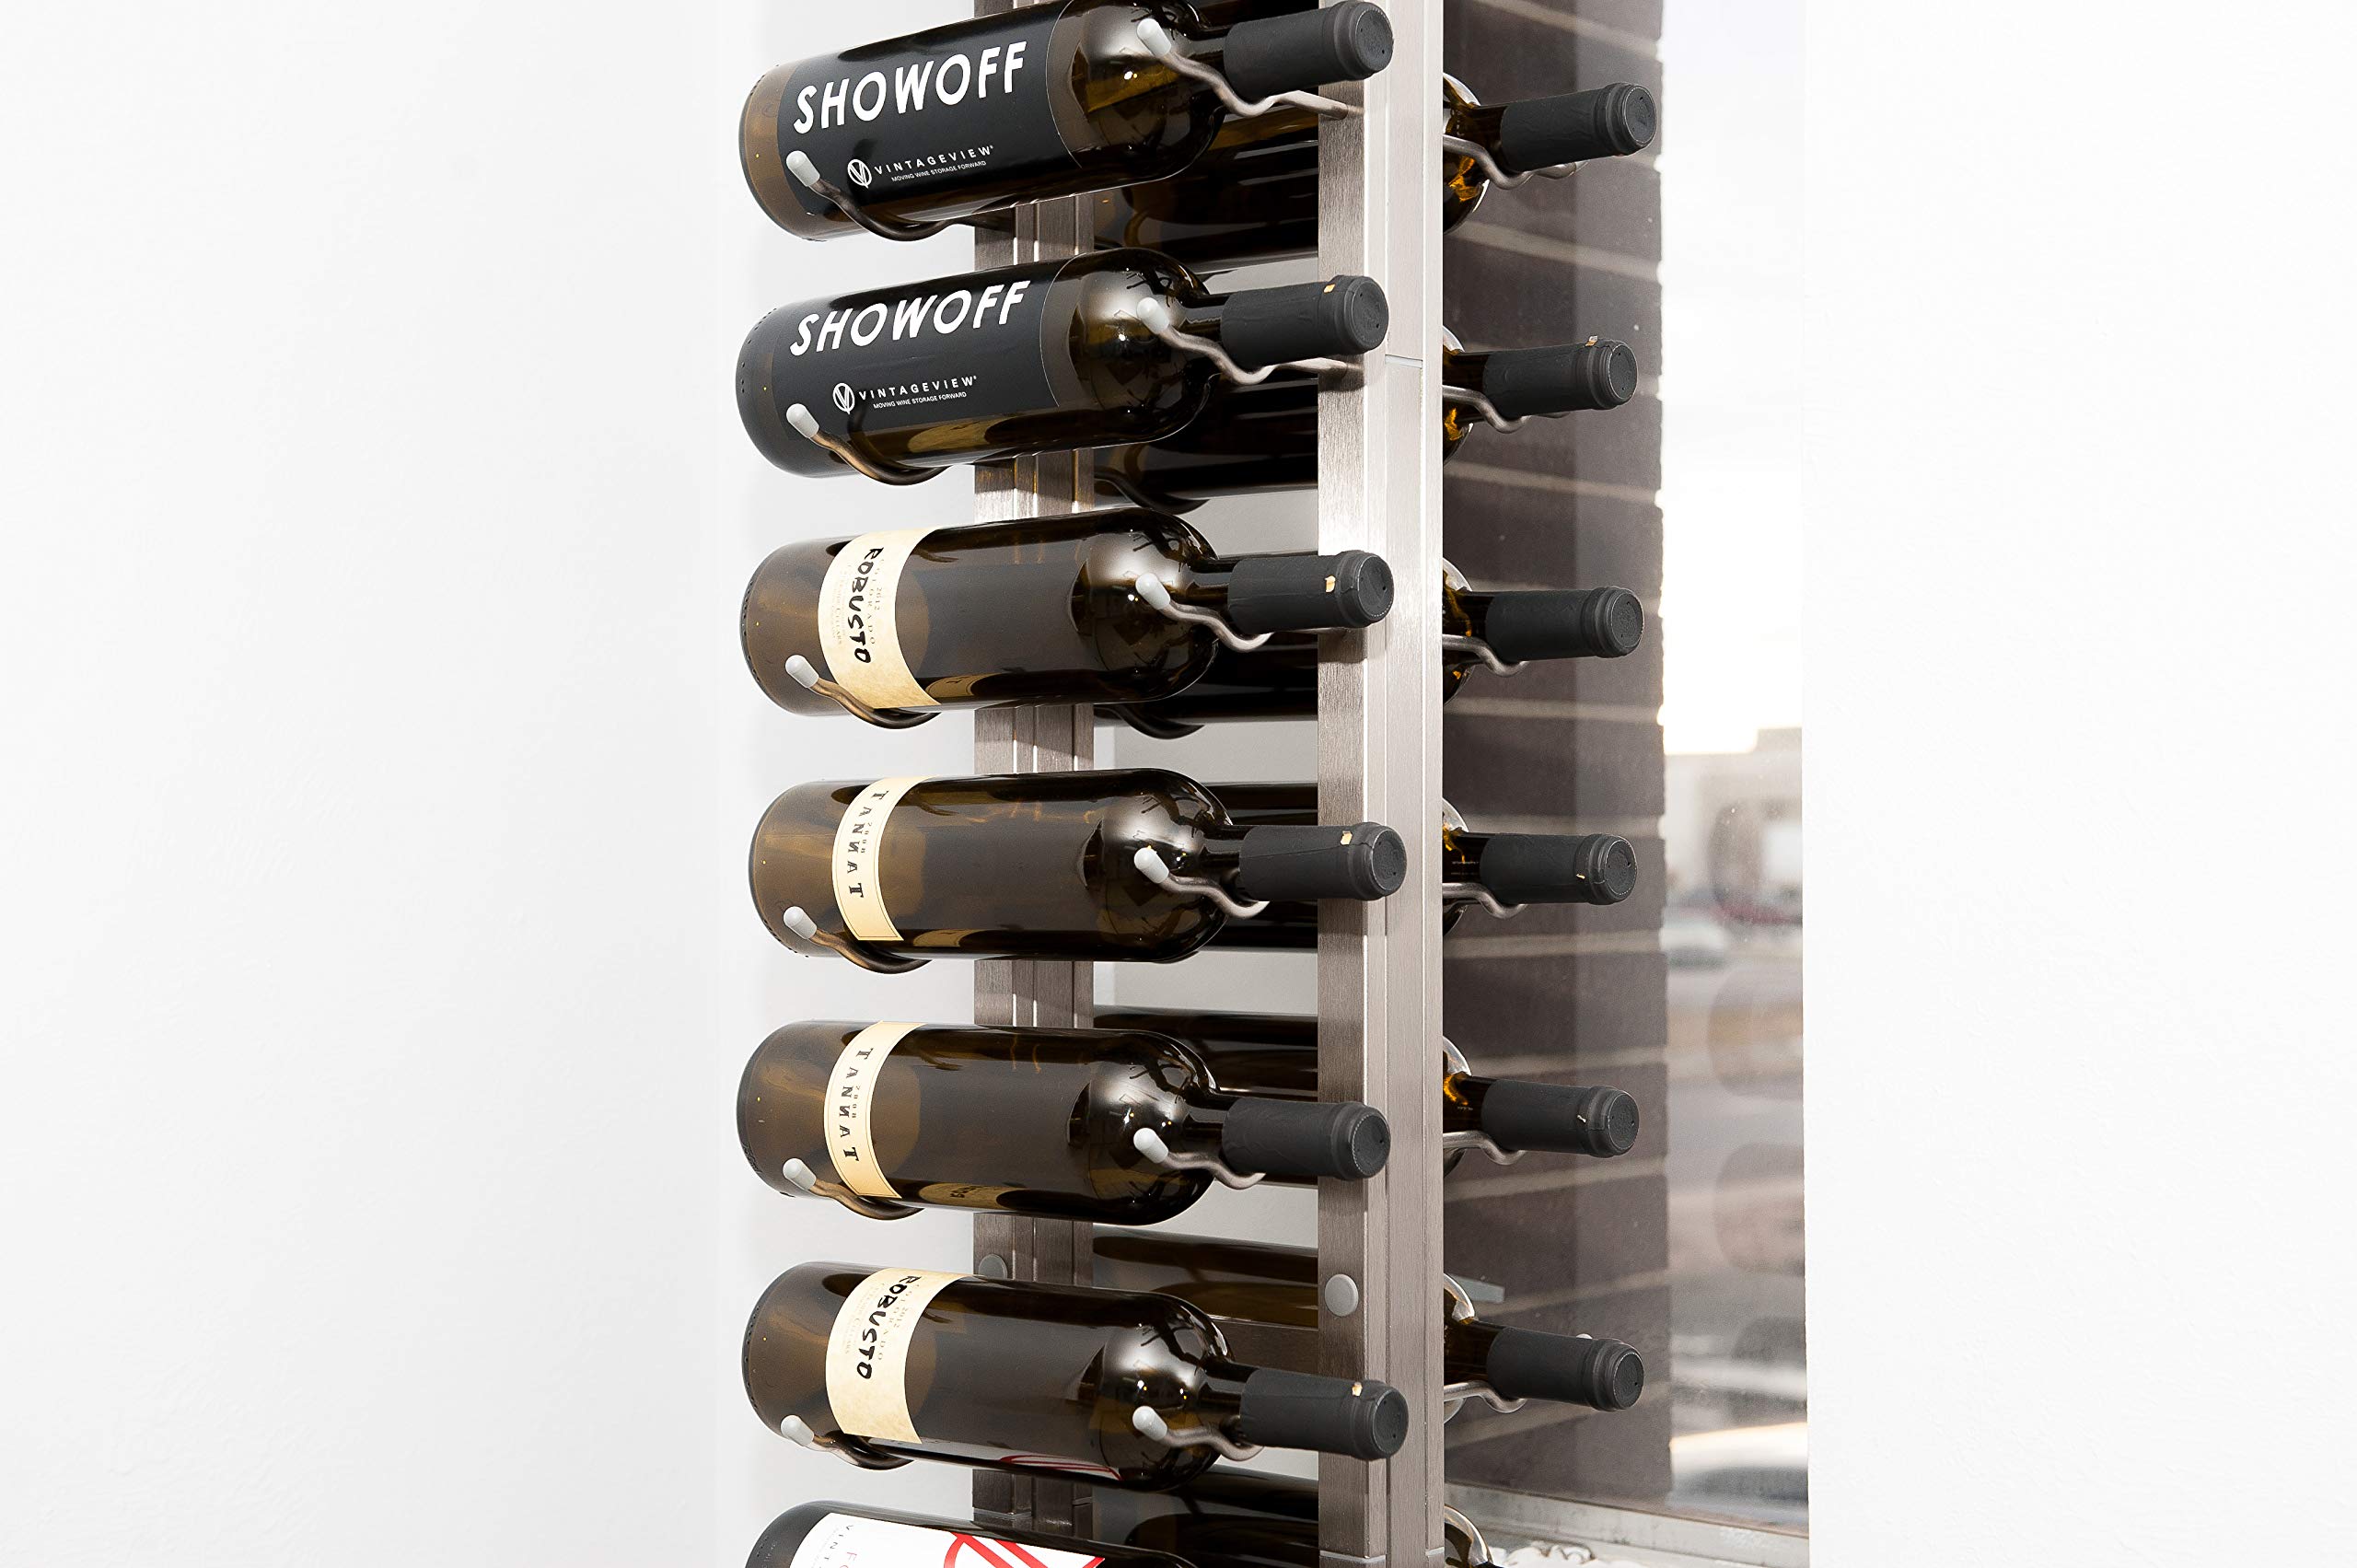 VintageView Wall Series Frame - Up to 162 Bottle Floating Wine Rack - Stylish Modern Wine Storage with Label Forward Design (Brushed Nickel, 10')